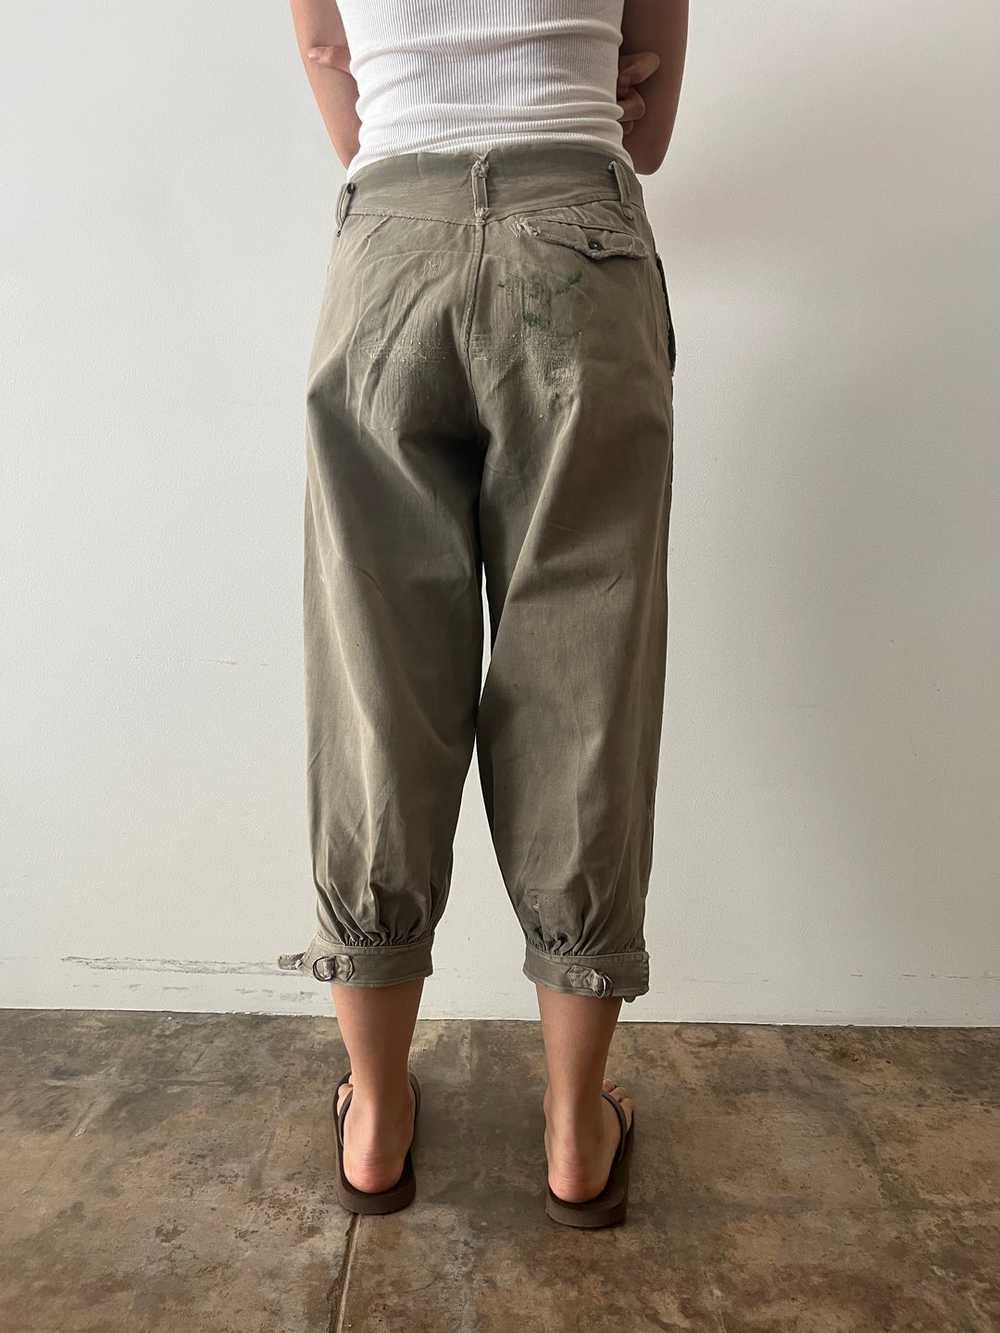 40s/50s Japanese Cotton Twill Work Pants - image 4